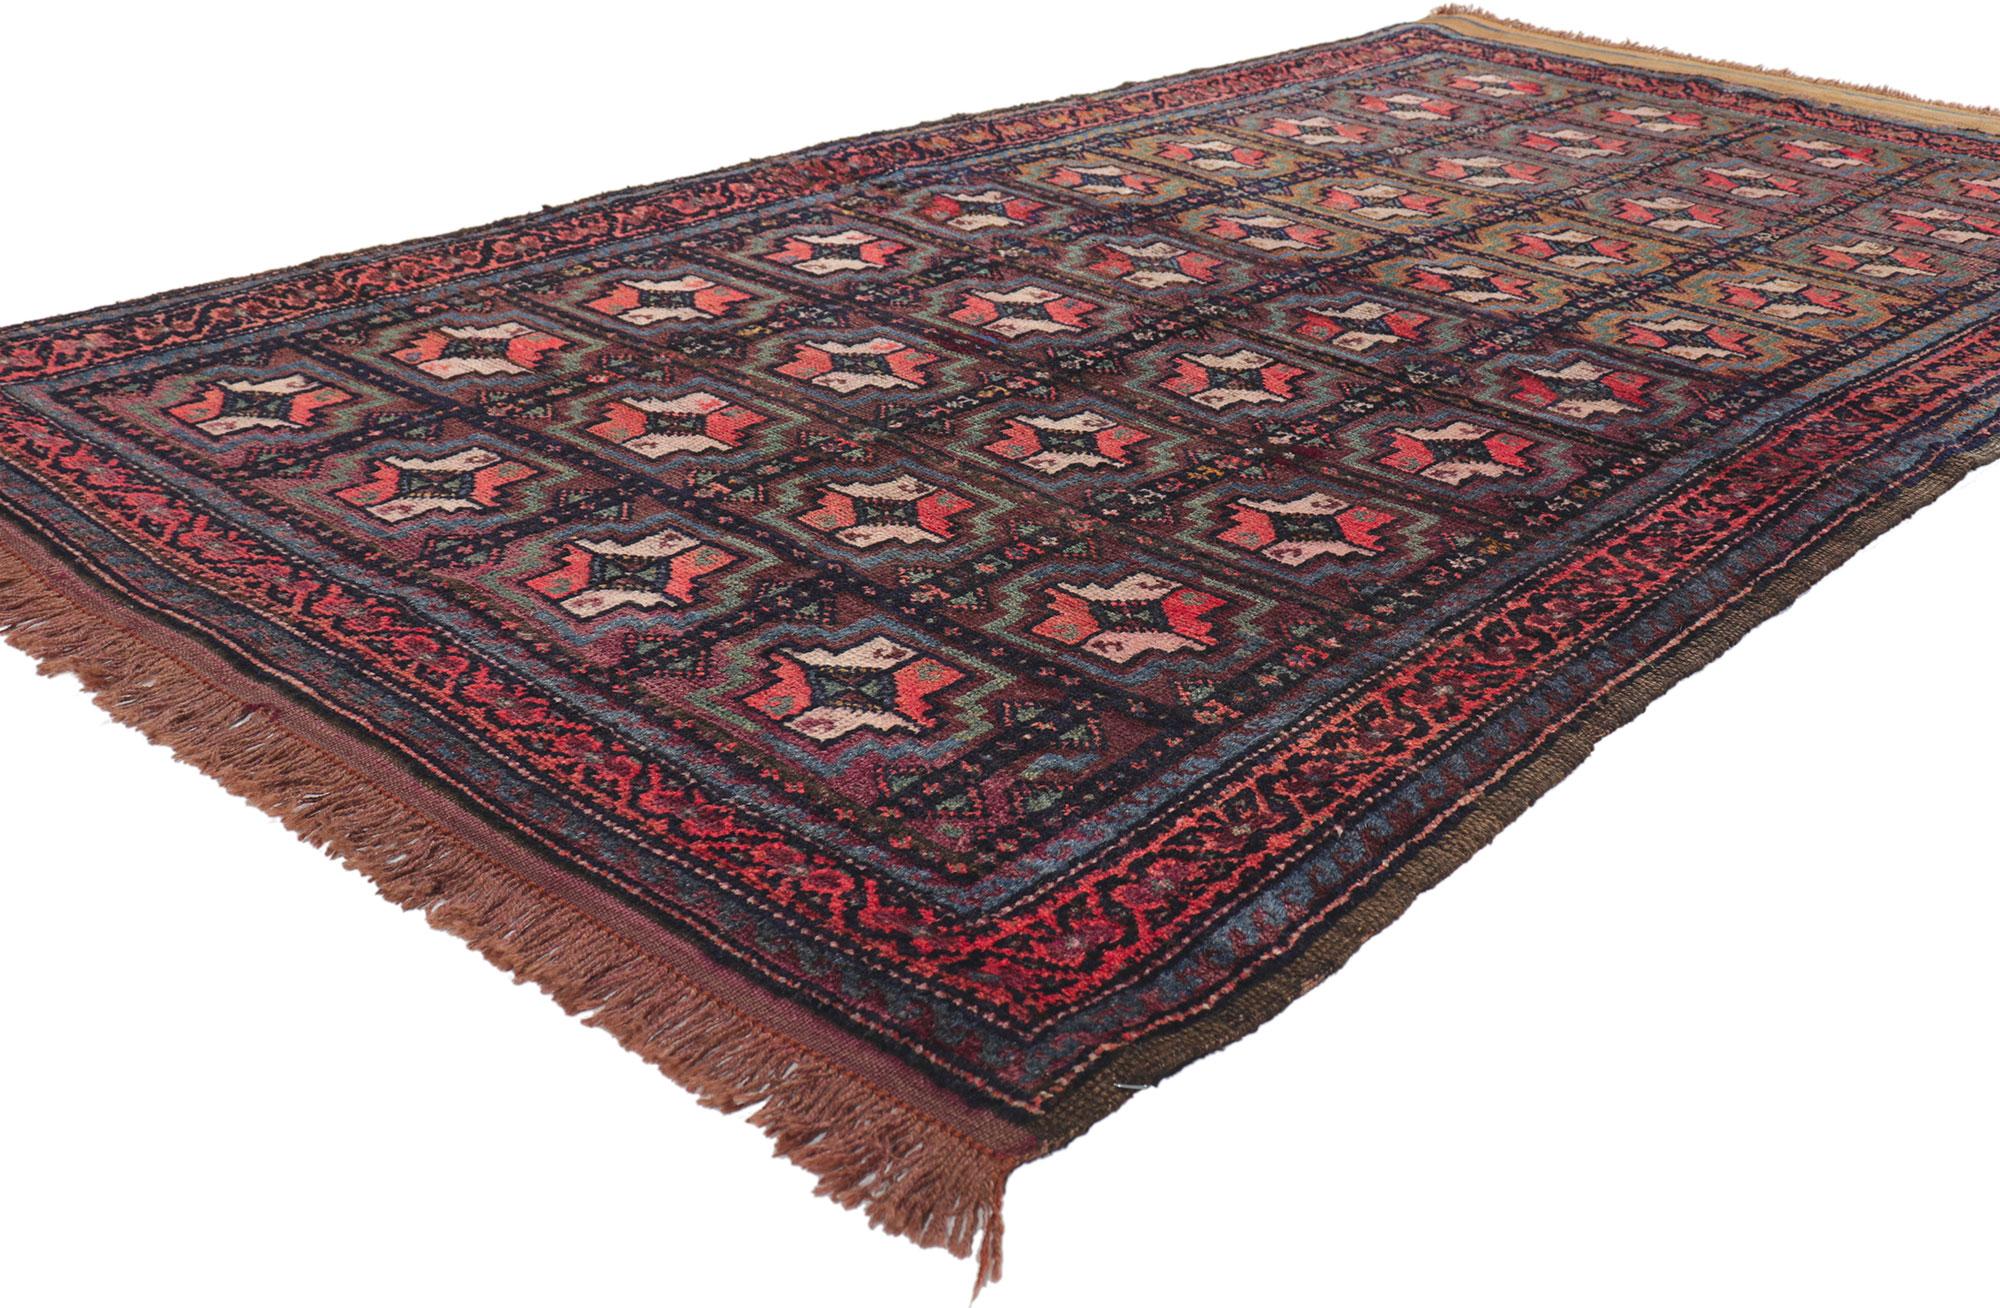 61222 vintage Persian turkoman rug, 04'00 x 07'02.
With its nomadic charm and tribal style, this hand knotted wool vintage turkoman rug is a captivating vision of woven beauty. The compartmental design and earthy colorway woven into this vintage